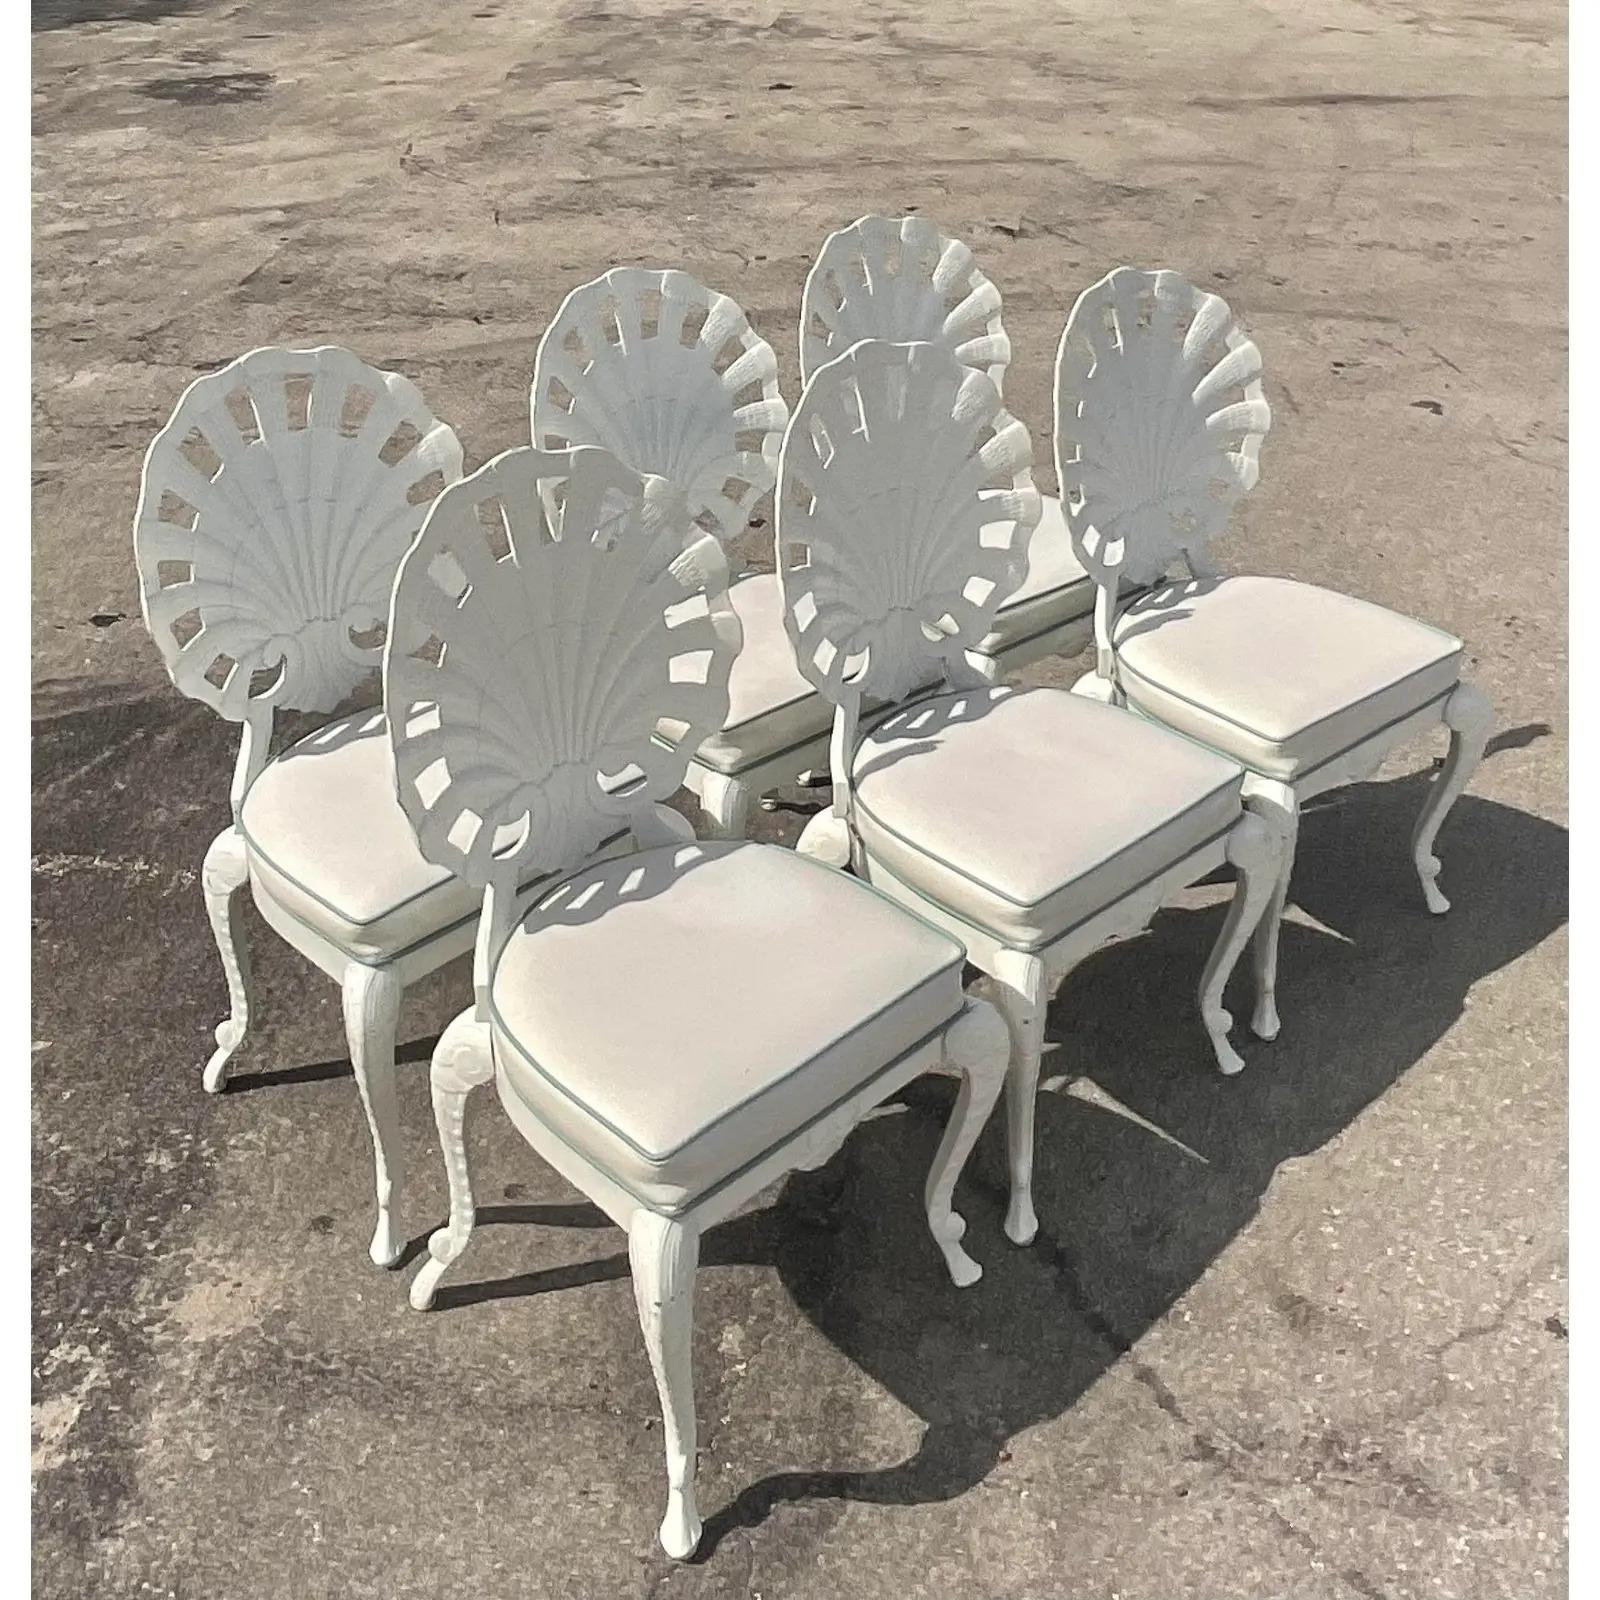 North American Vintage Regency Tropitone Cast Aluminum Grotto Chairs, Set of 6